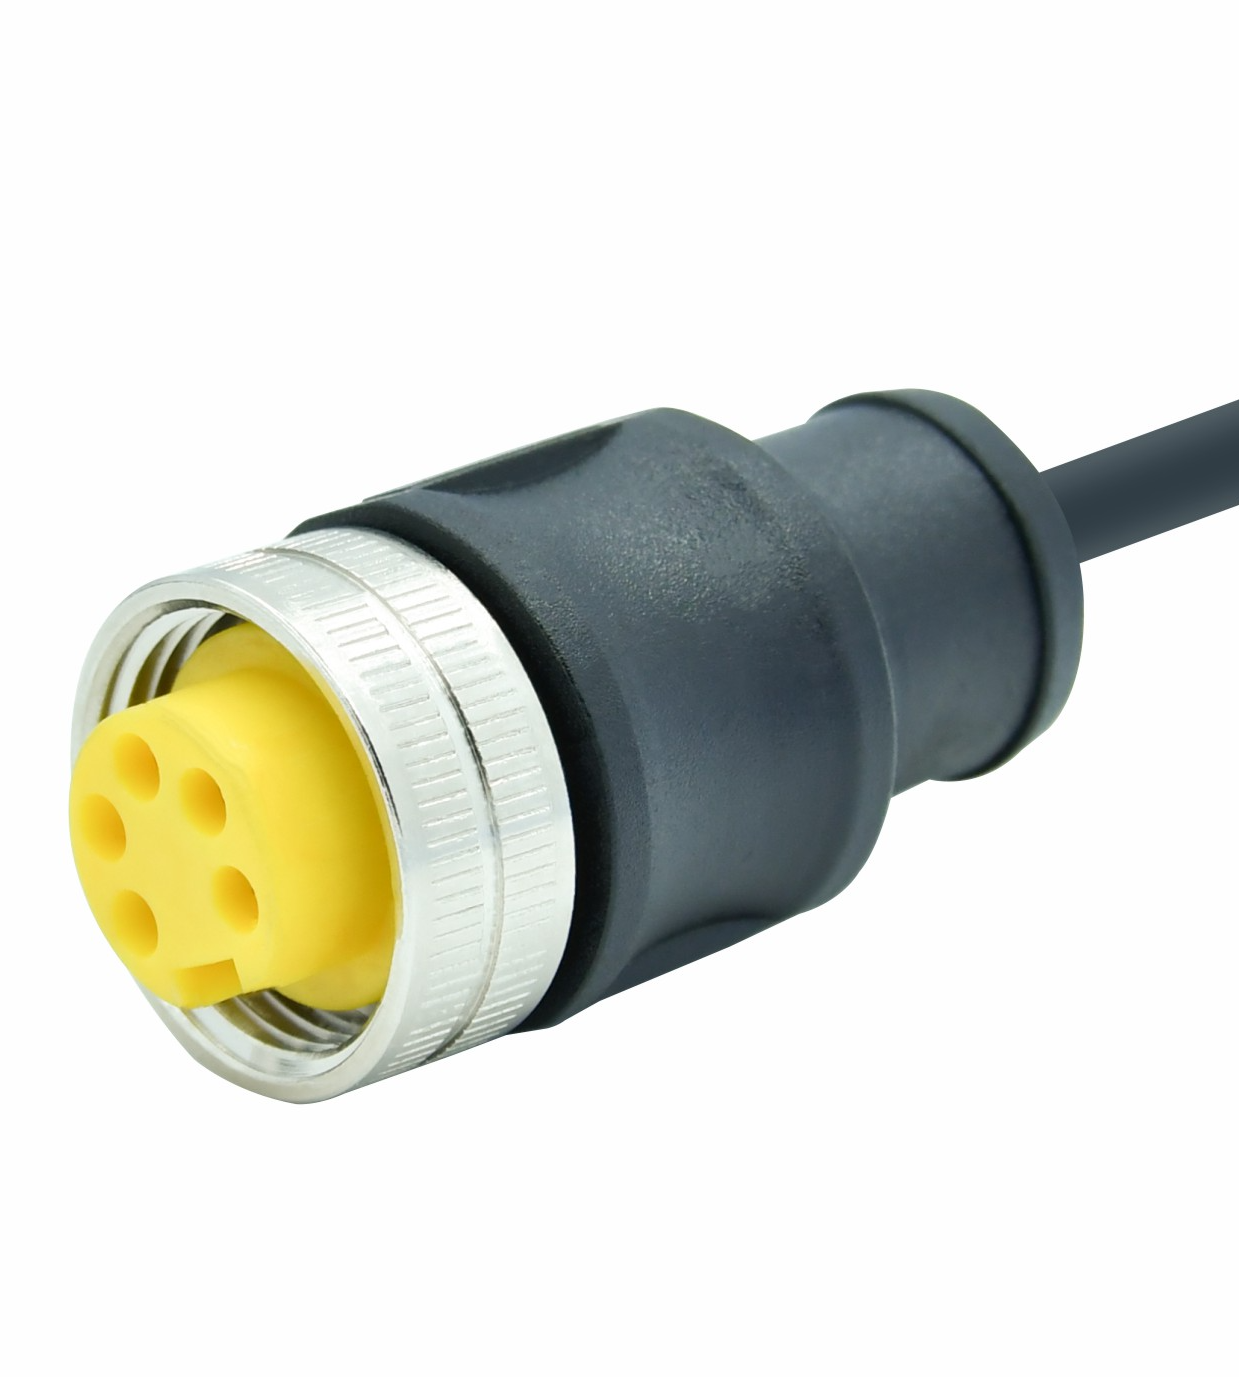 Rigoal: Your Reliable Source for High-Quality Circular Connectors